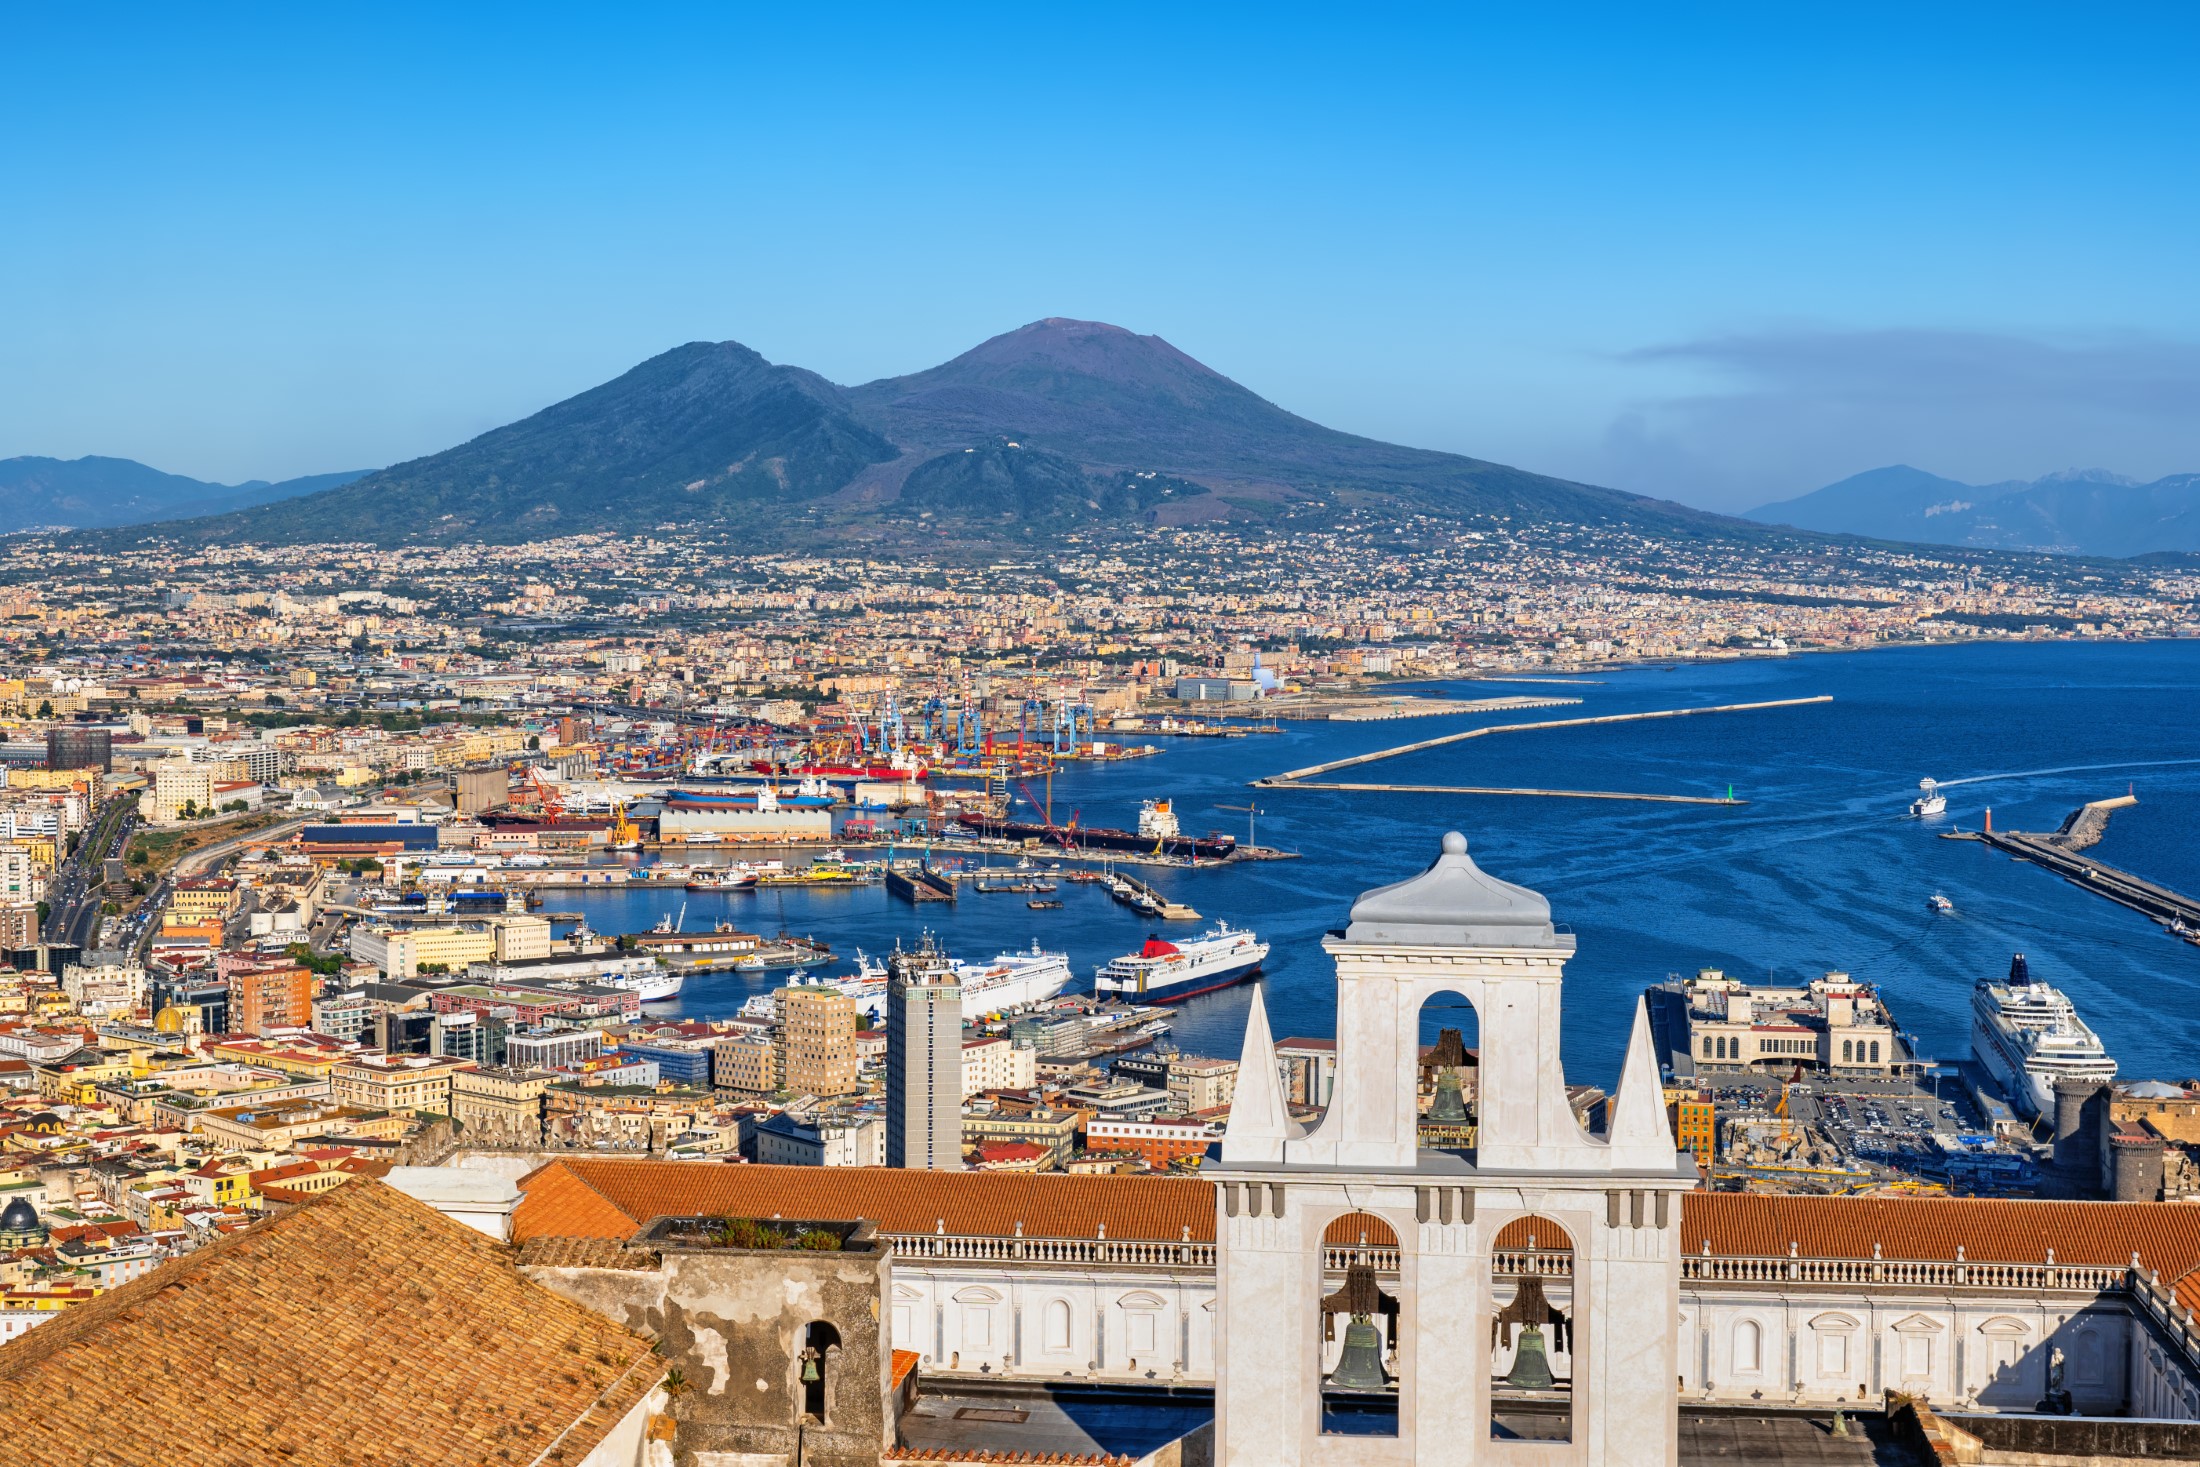 City of Naples in Italy, cityscape with port and Gulf of Napoli with mount Vesiuvius on the horizon, Campania region.